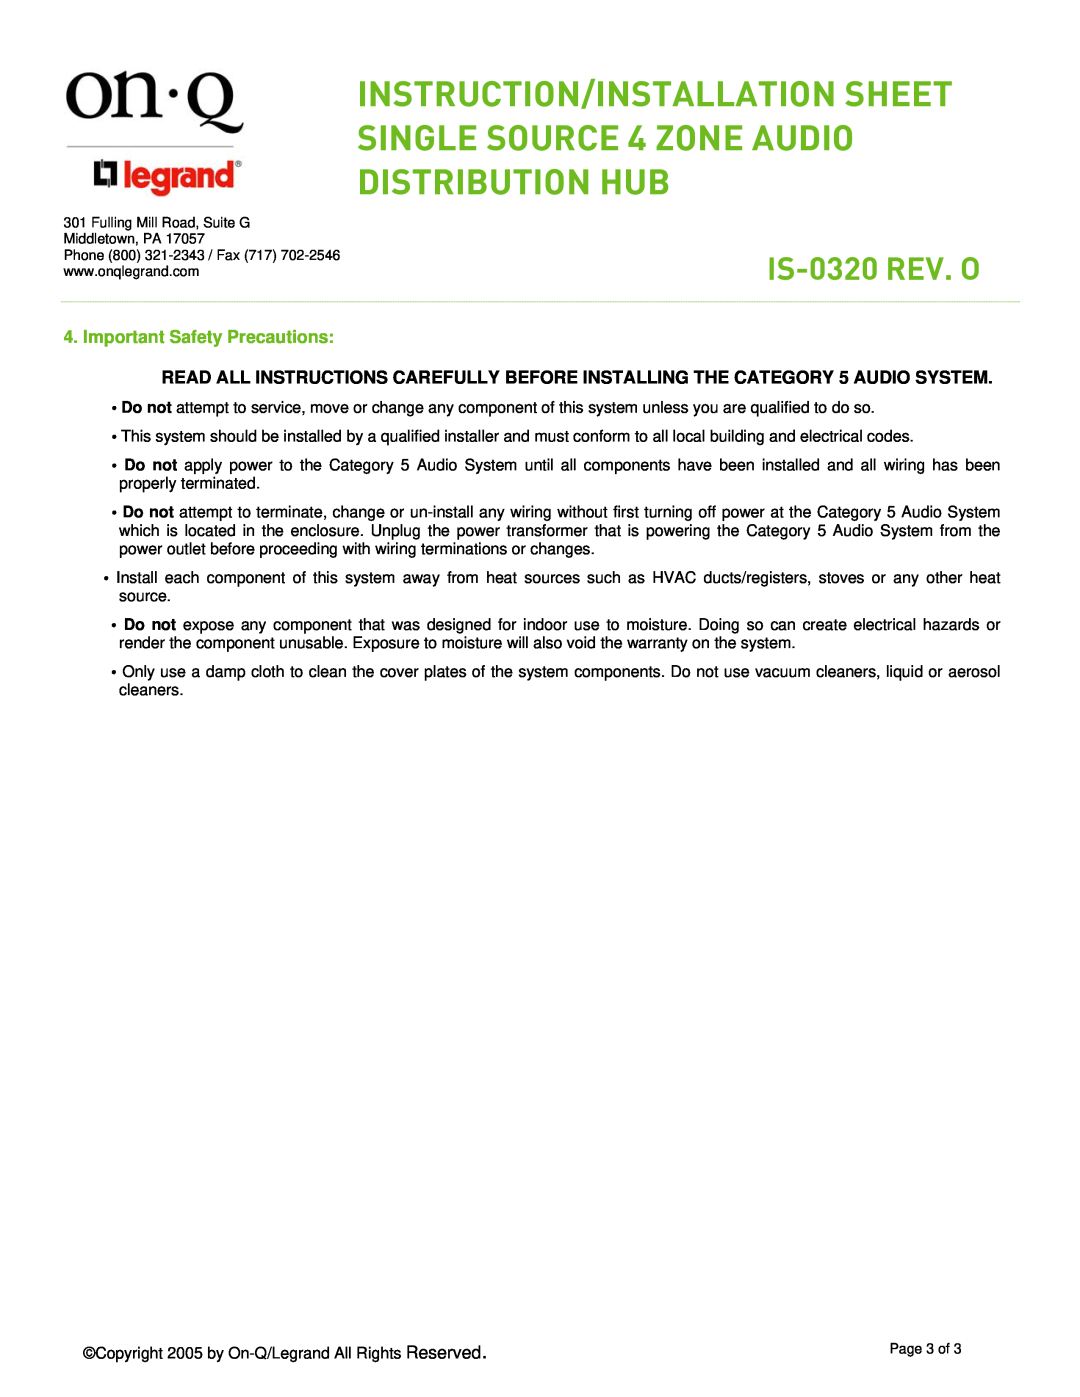 On-Q/Legrand IS-0320 REV. O manual Important Safety Precautions, Page 3 of 